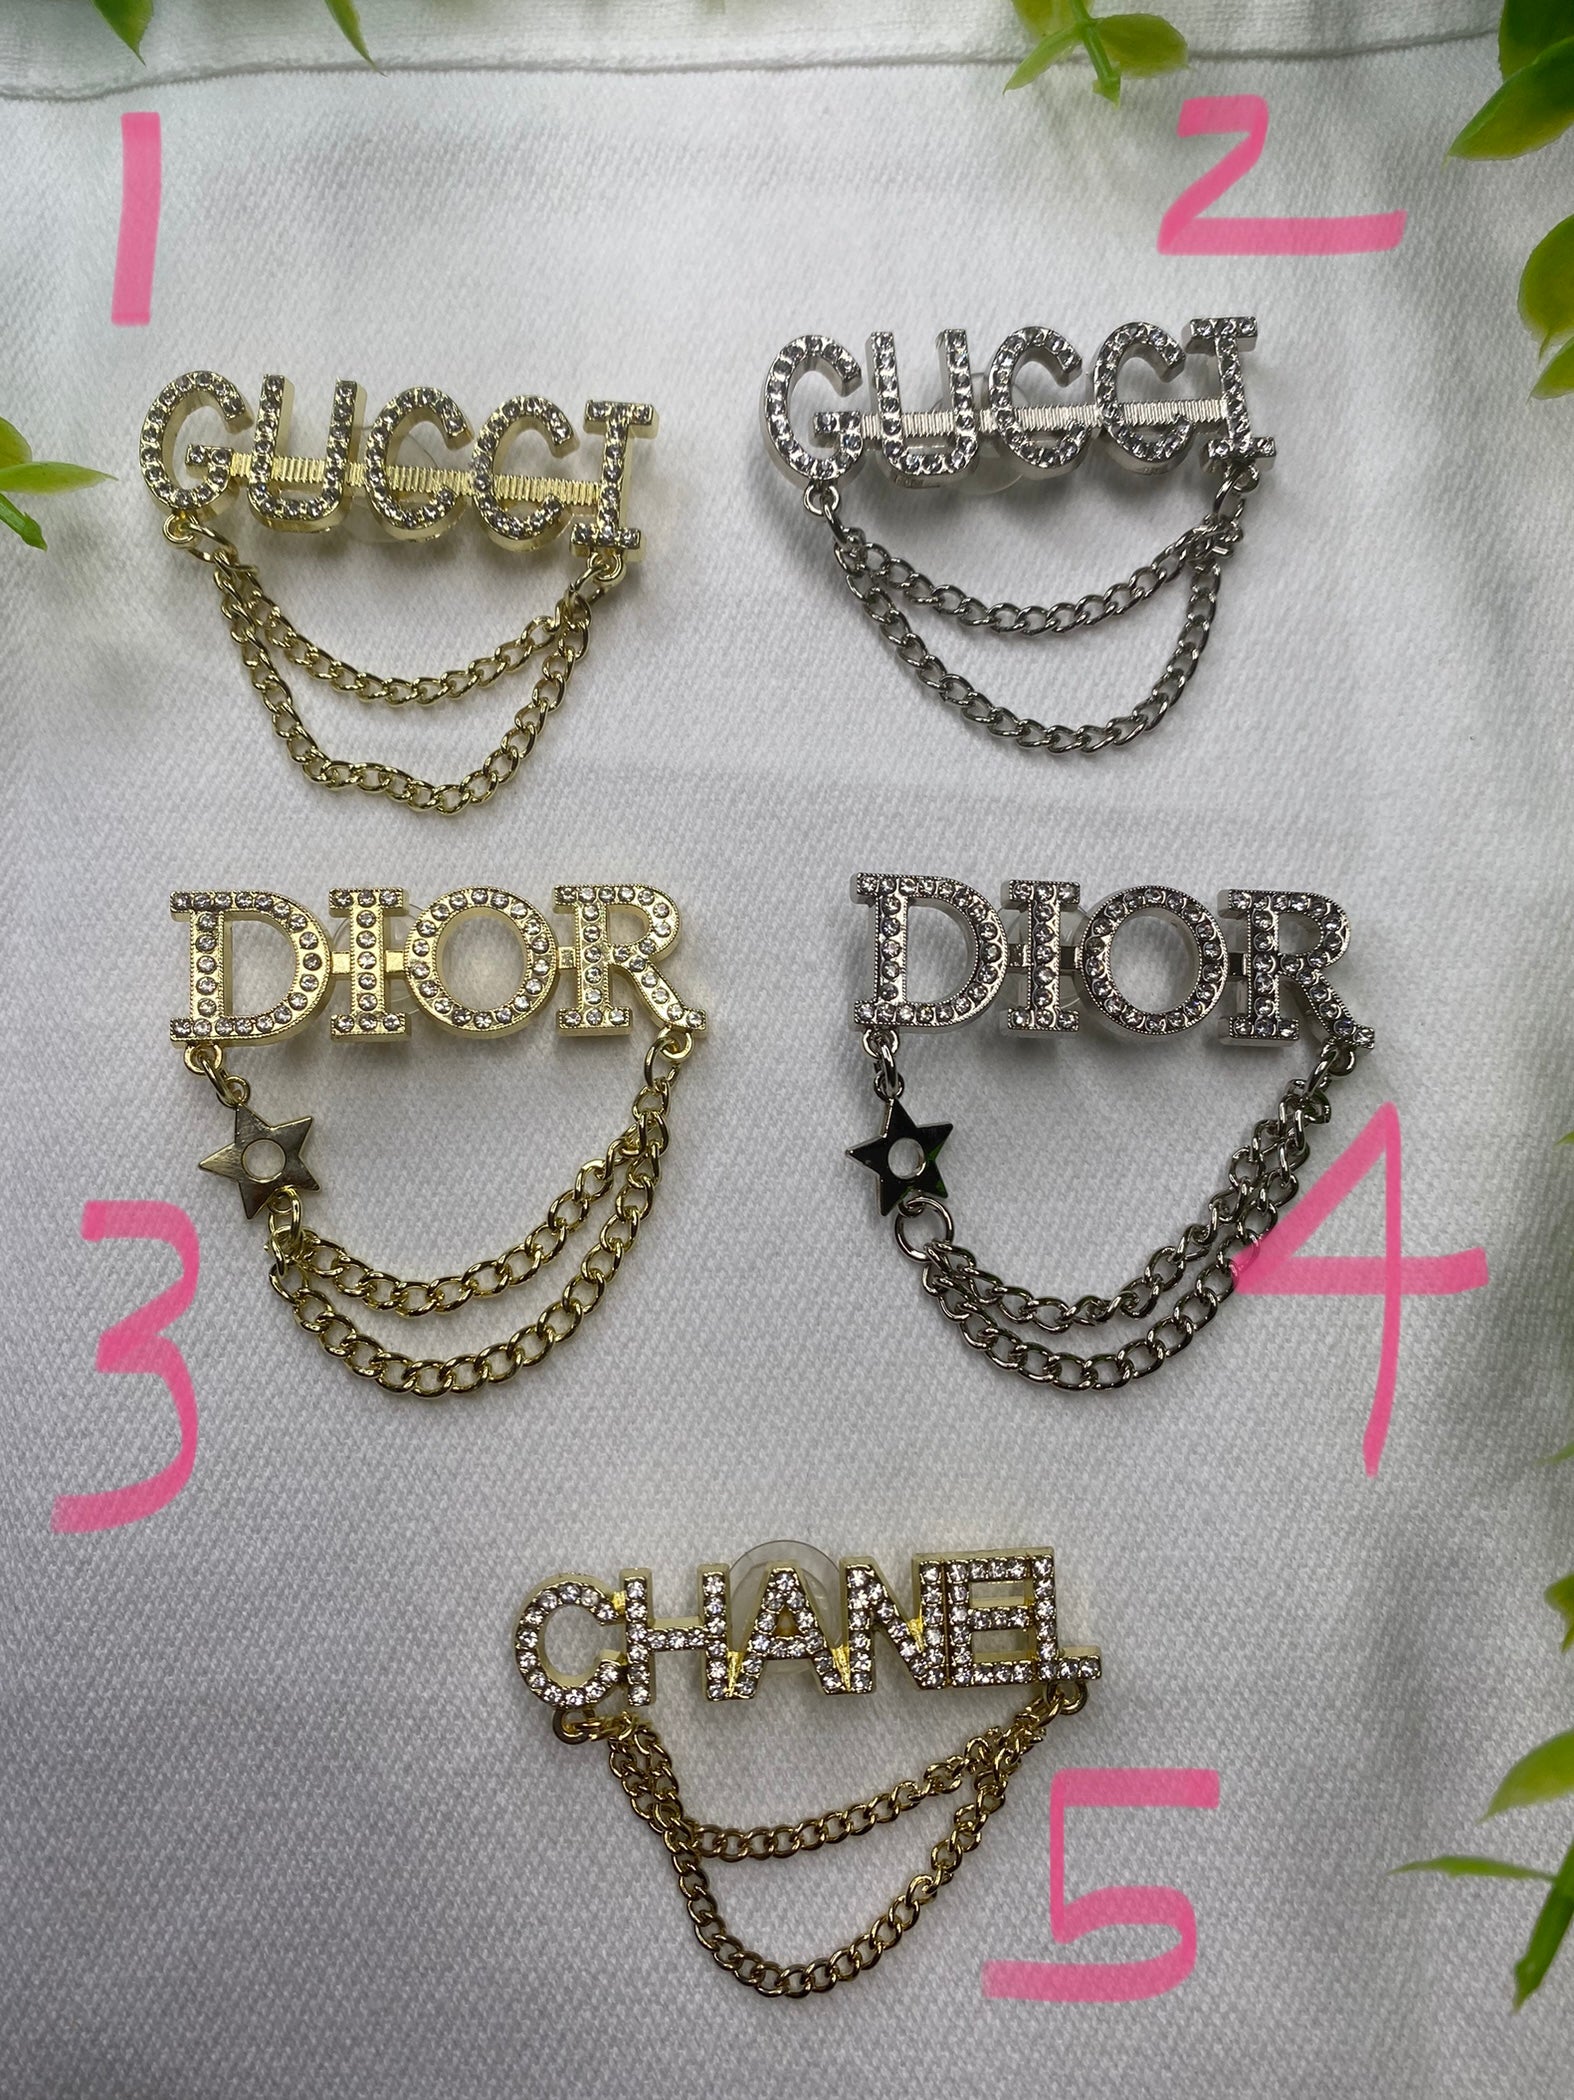 D Inspired Chain Croc Charms